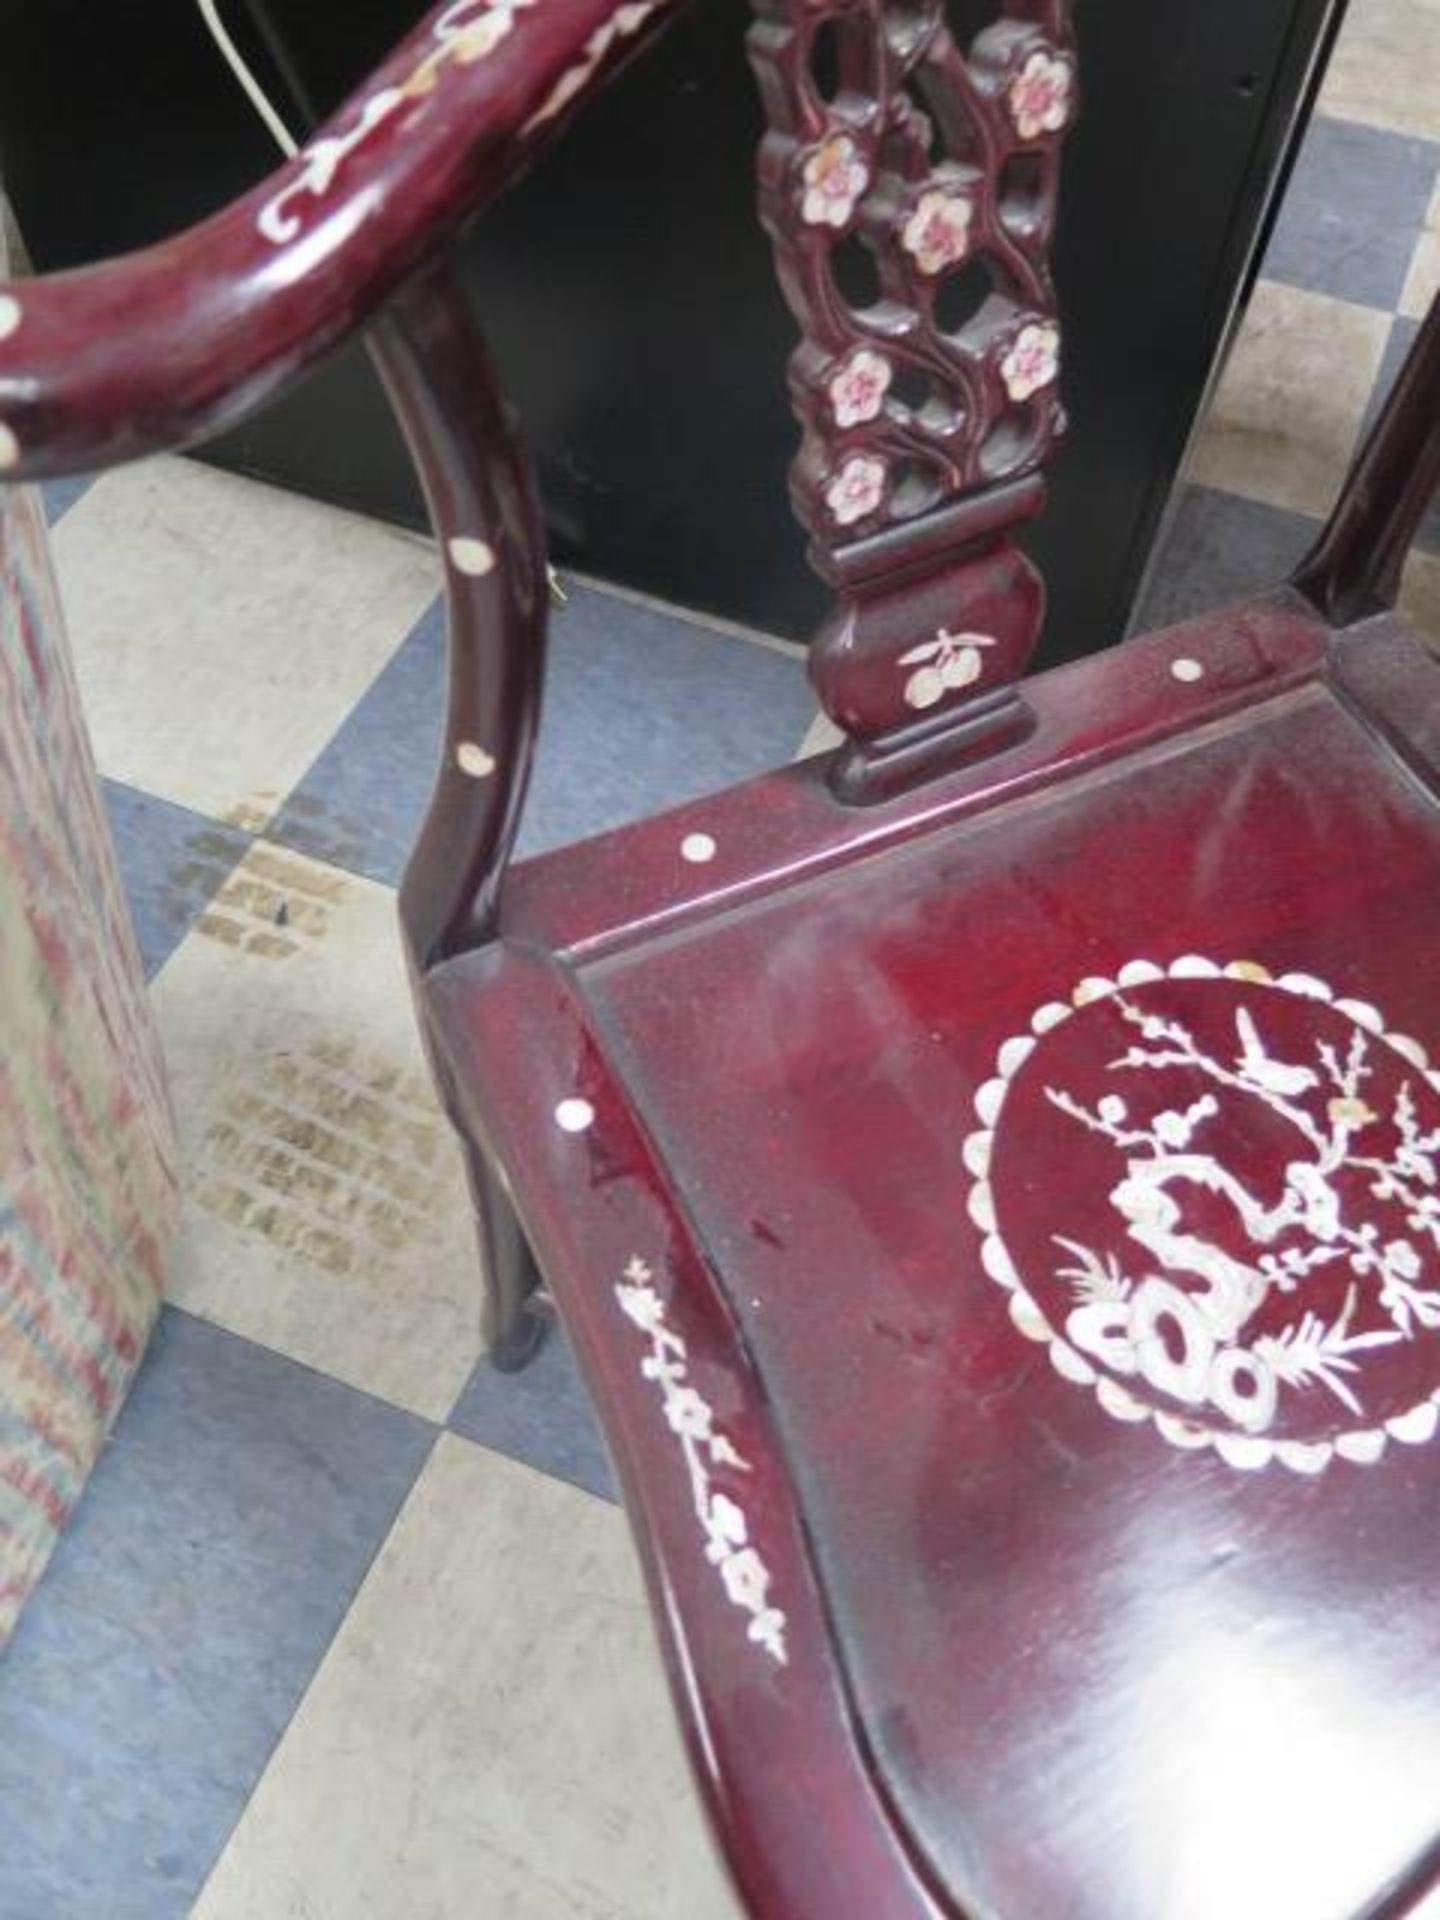 Vintage Corner Chair w/ Mother of Pearl Inlays and Vintage Style French Cane Back Chair (SOLD AS-IS - Image 6 of 10